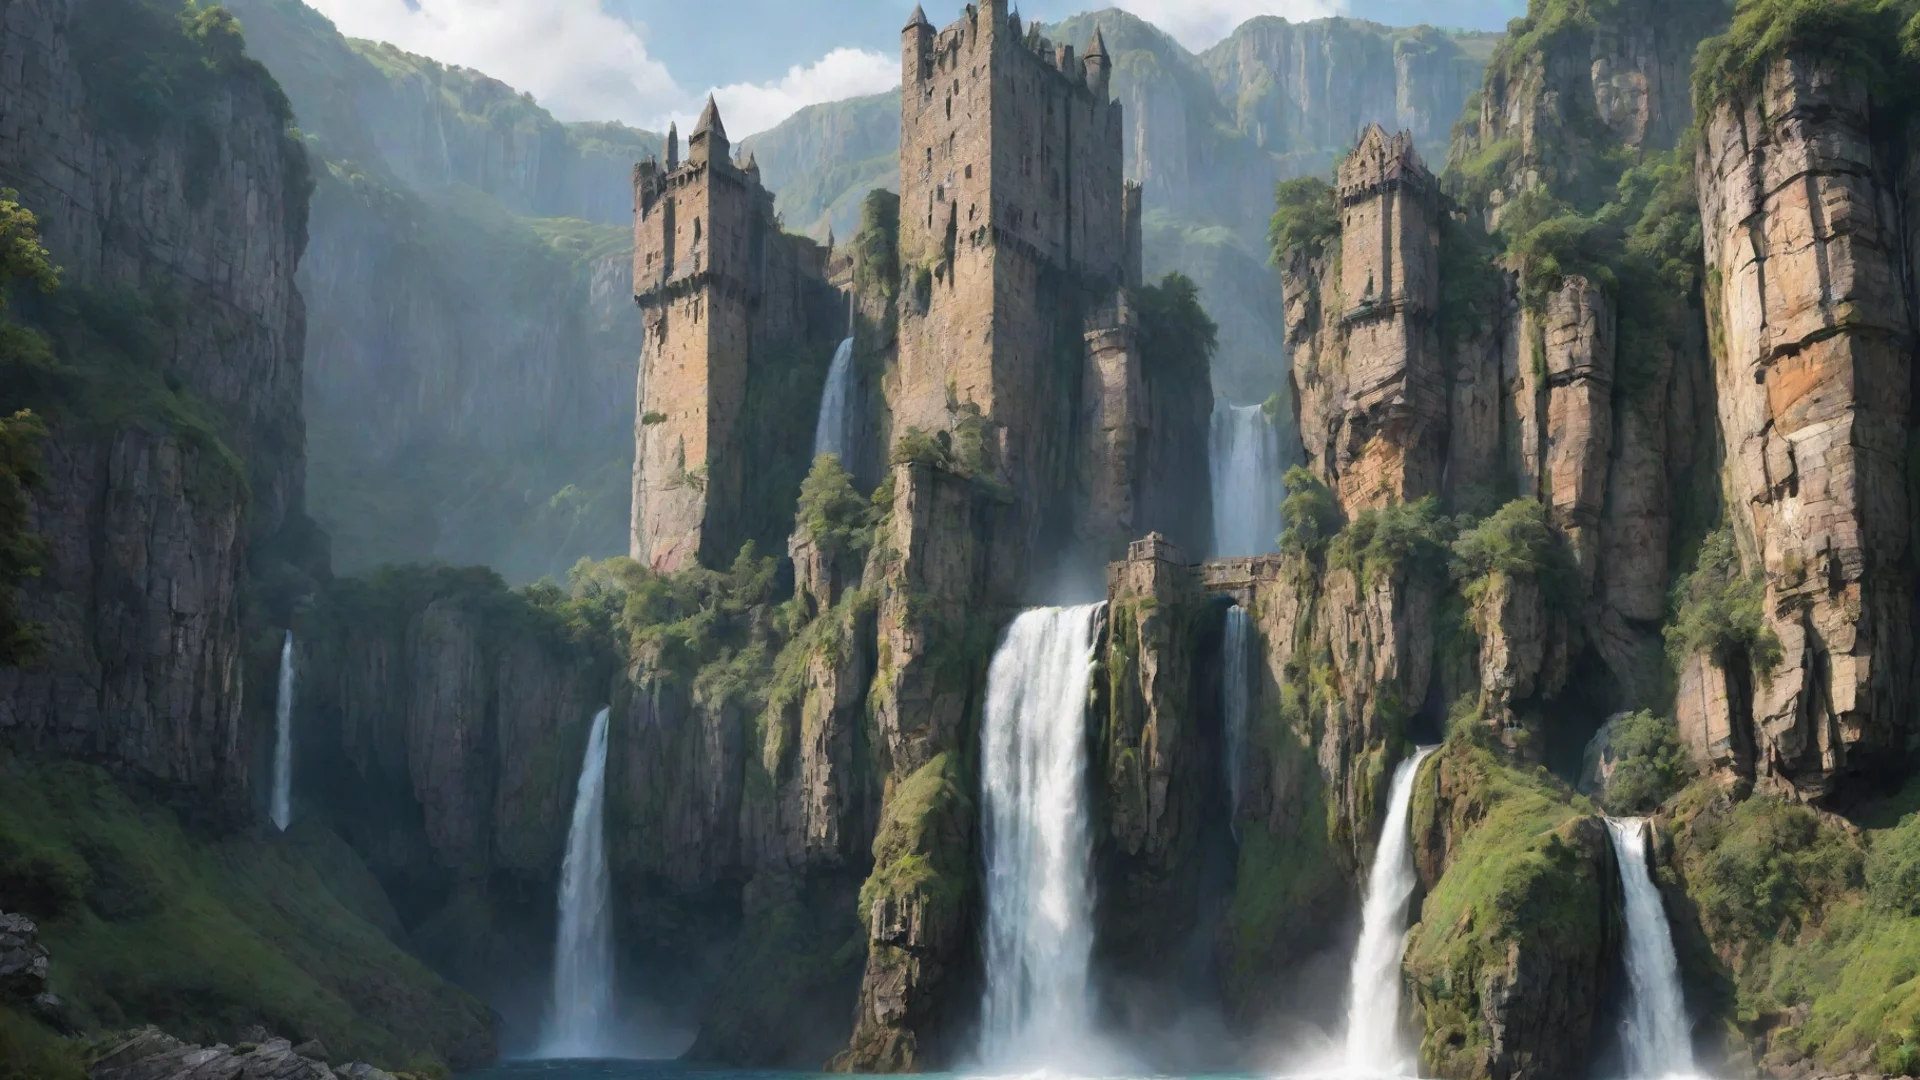 amazing castle huge cliffs waterfalls relaxing environment hd aesthetic awesome portrait 2 wide